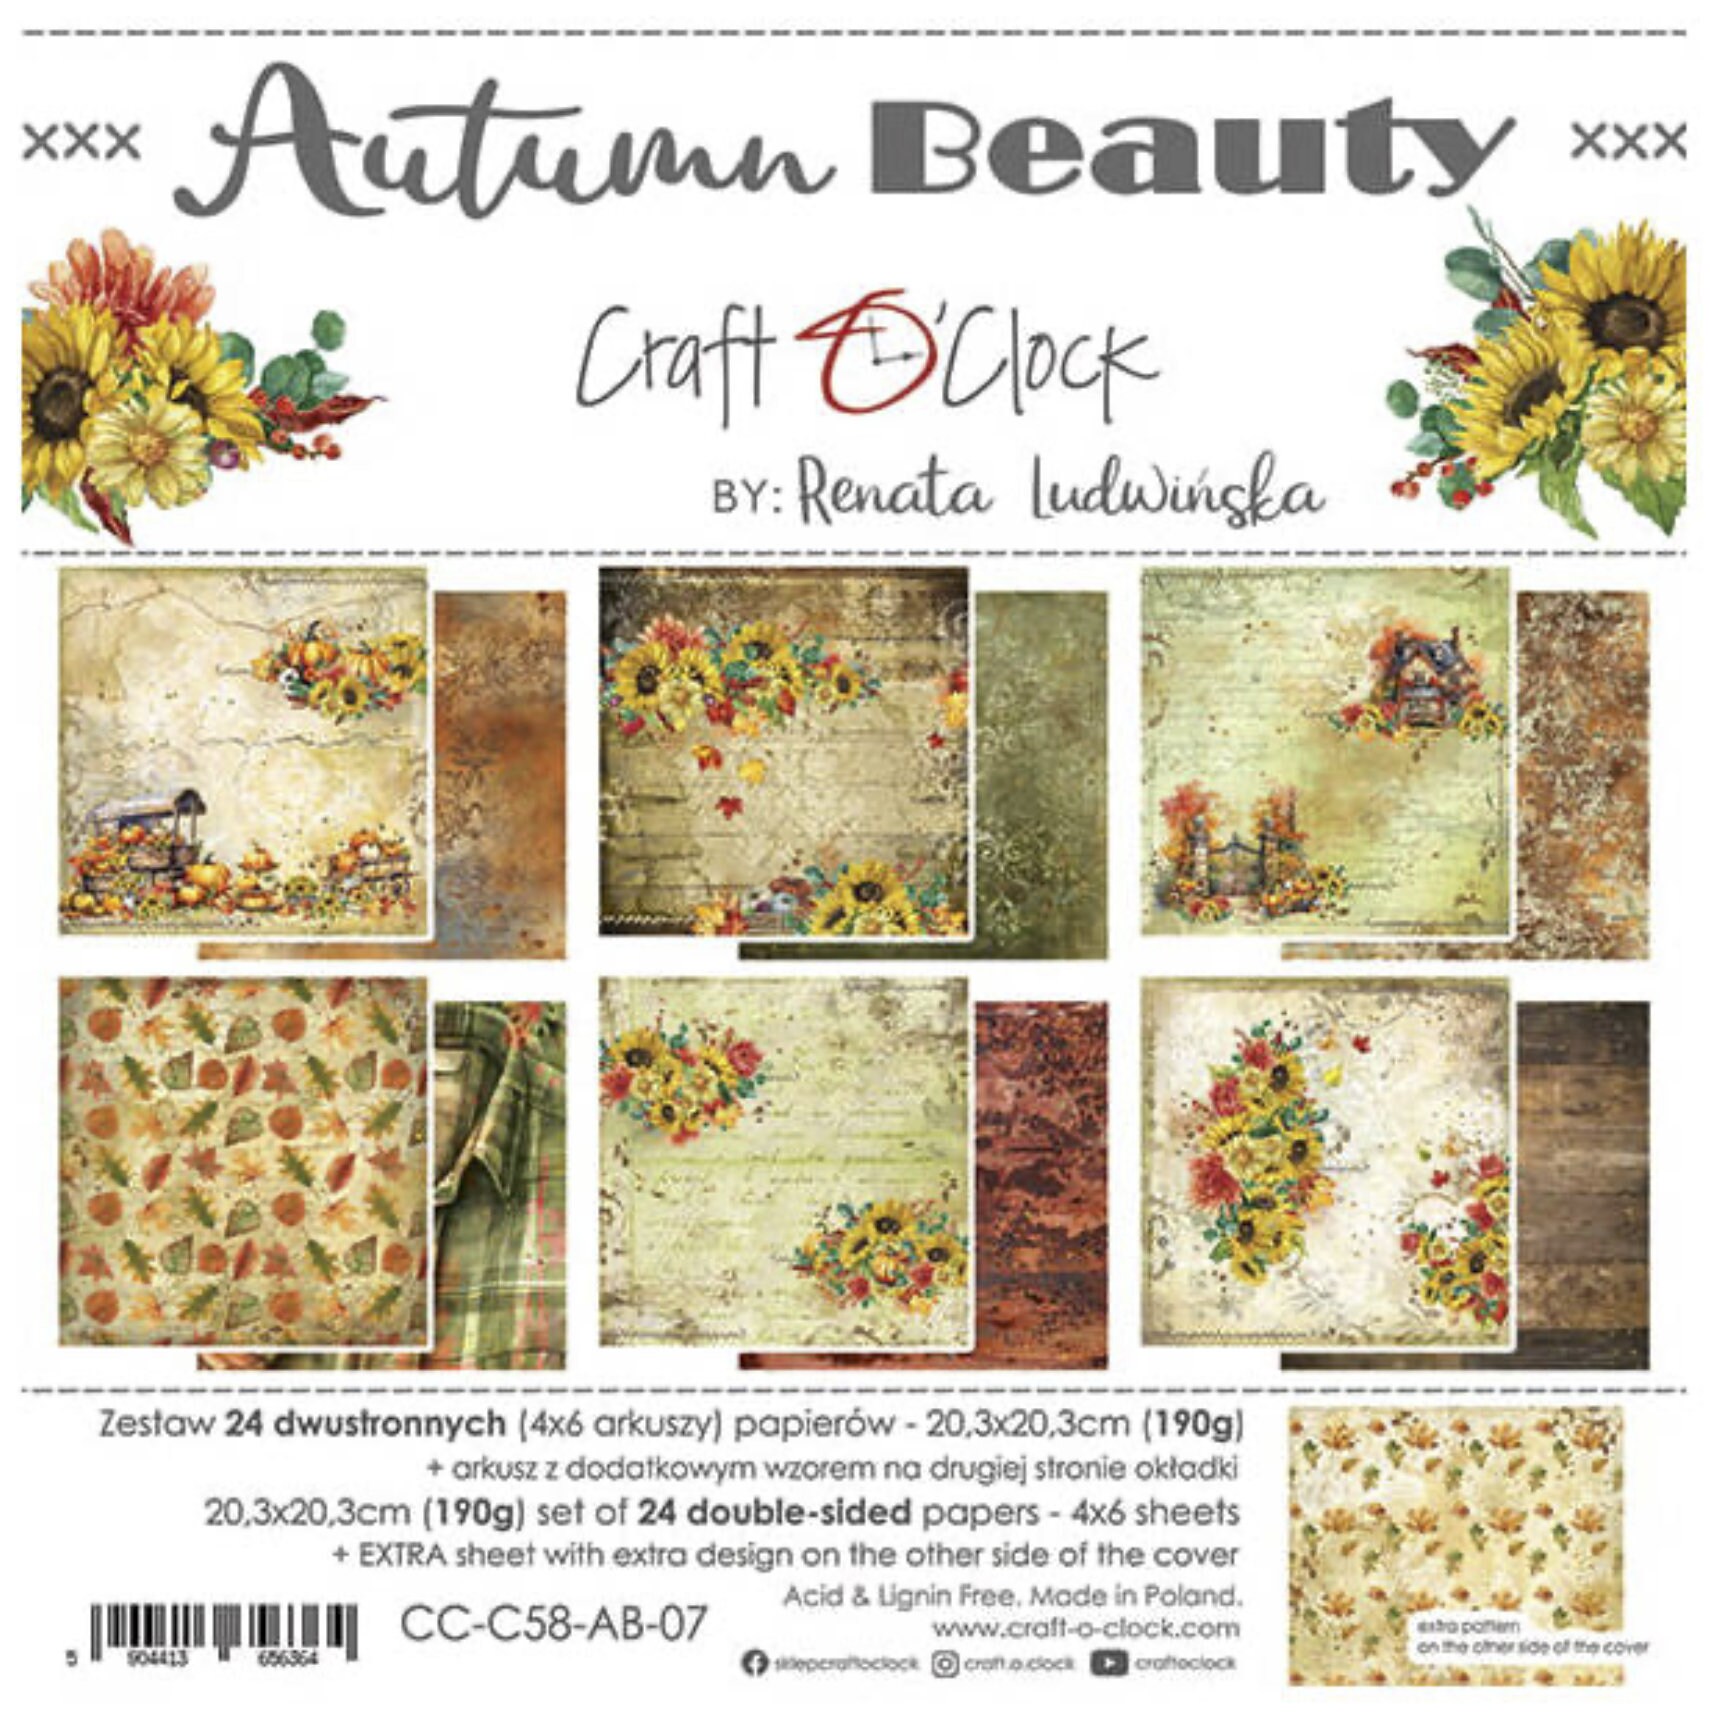 Fall Scrapbook Paper Pad: 20 patterned double sided sheets. 20 designs.  8.5 x 11 size (Decorative Craft Paper)